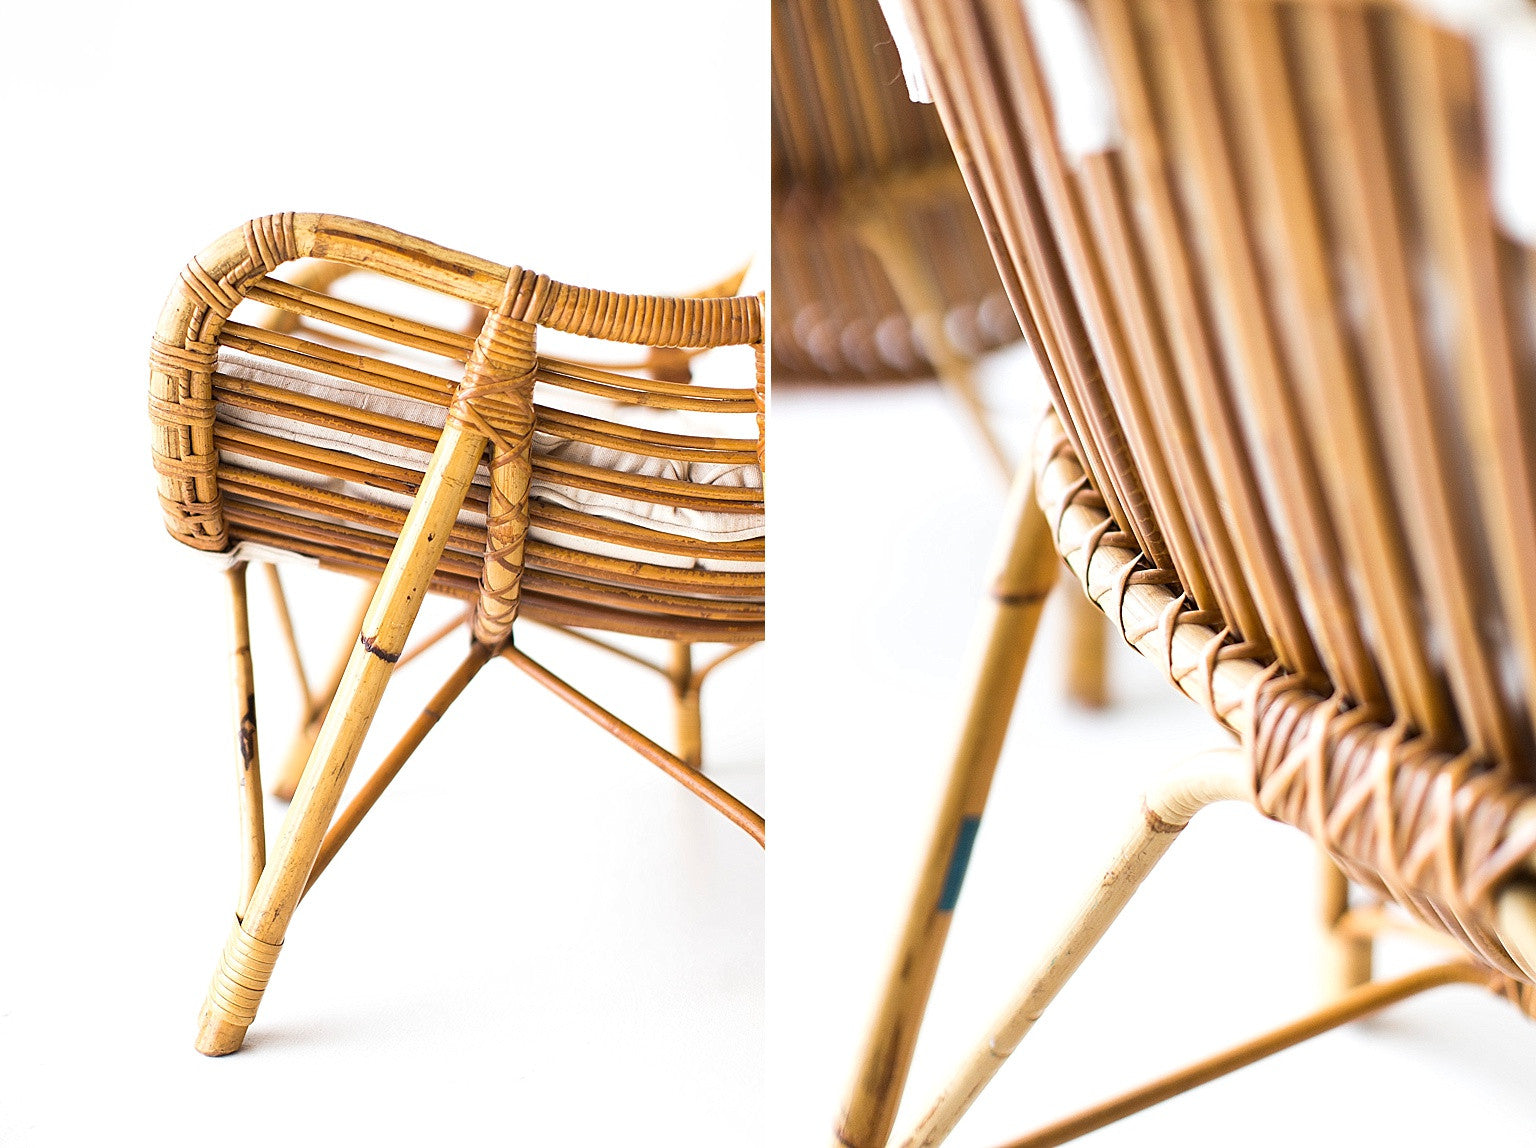 Danish Bamboo and Wicker Lounge Chairs by Laurids Lonborg - 01241602